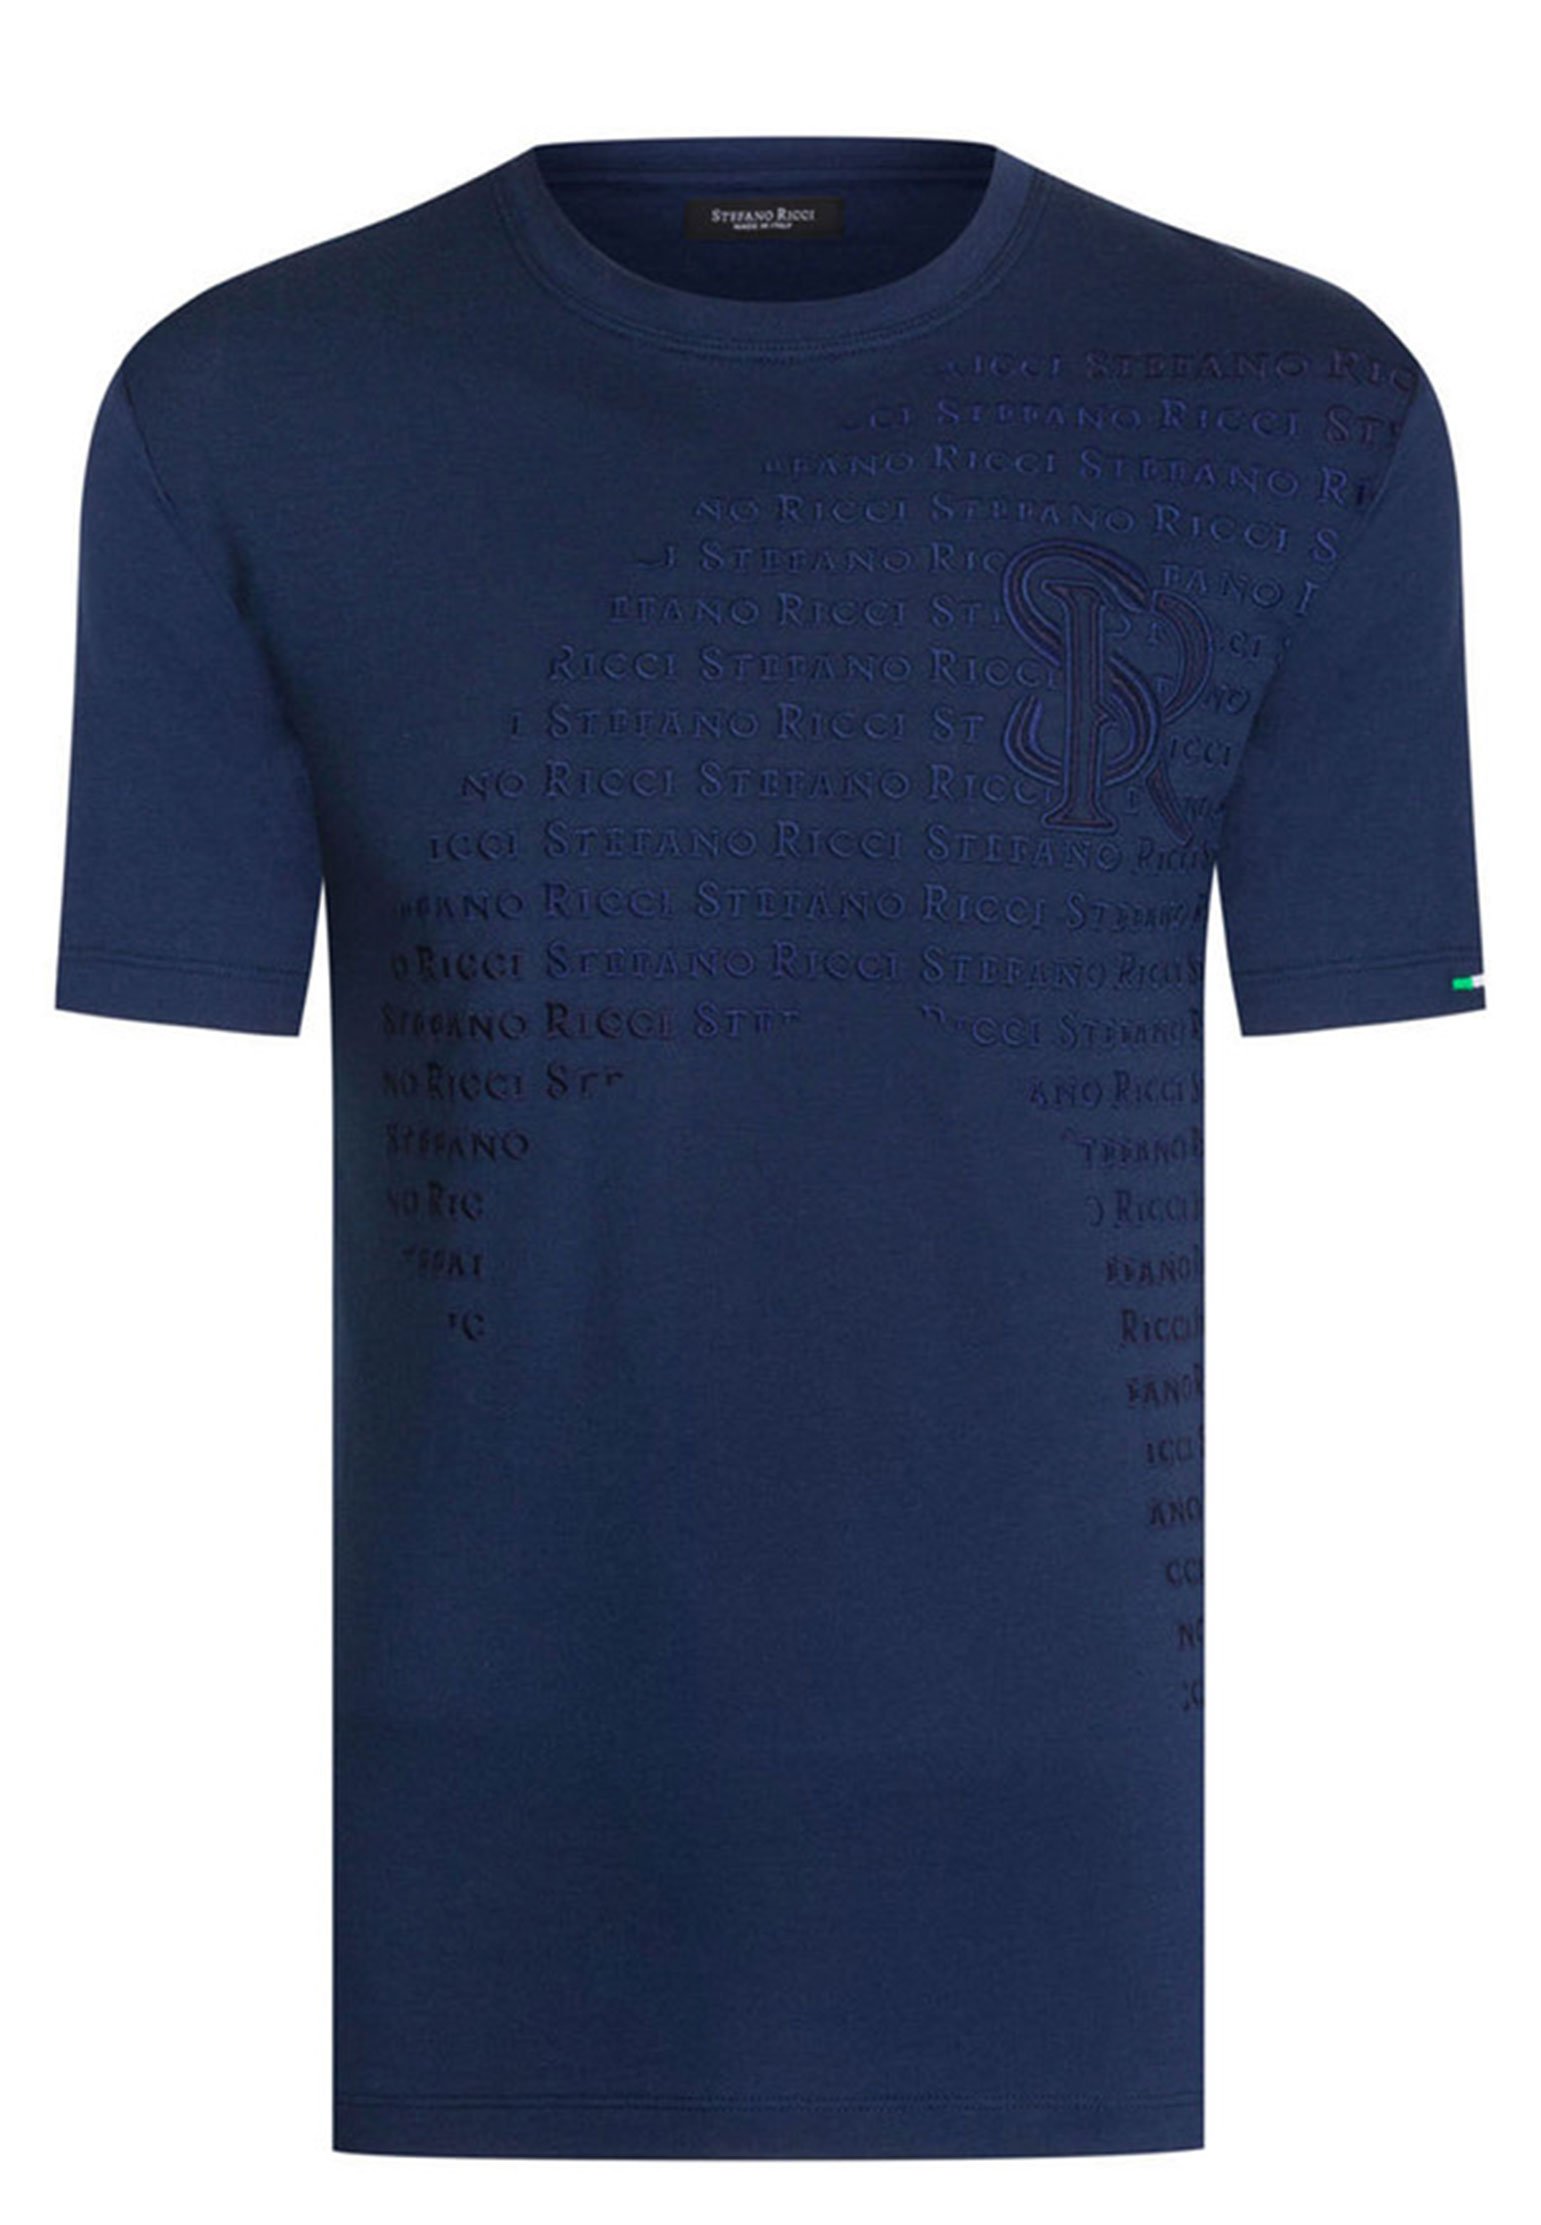 T-shirt STEFANO RICCI Color: blue marine (Code: 331) in online store Allure